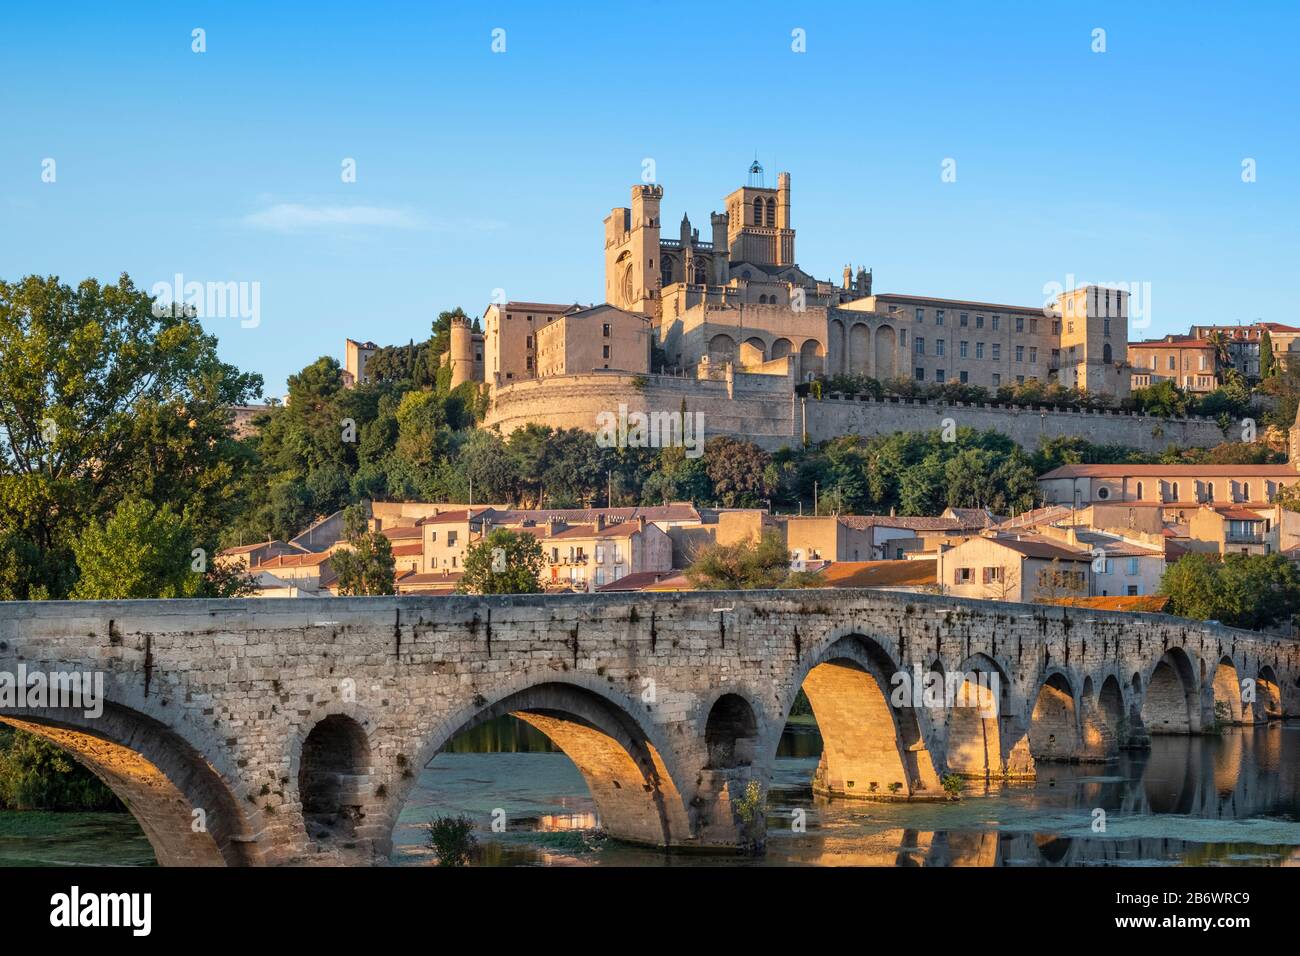 Europe, France, Occitanie. Saint Nazaire church and the old bridge in the fortified town of Beziers on a bluff above the River Orb Stock Photo